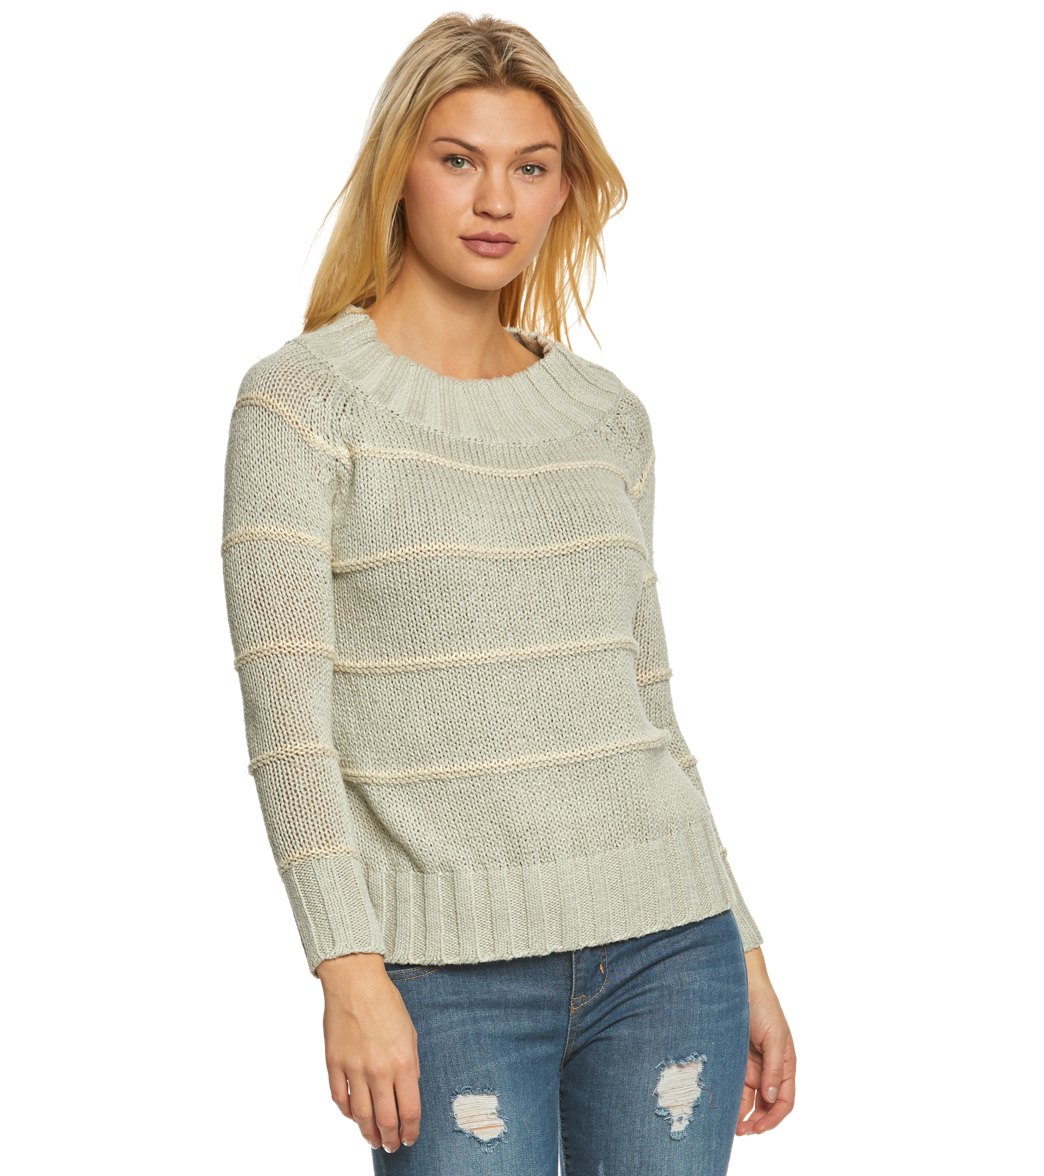 Billabong Snuggle Down Sweater at SwimOutlet.com - Free Shipping